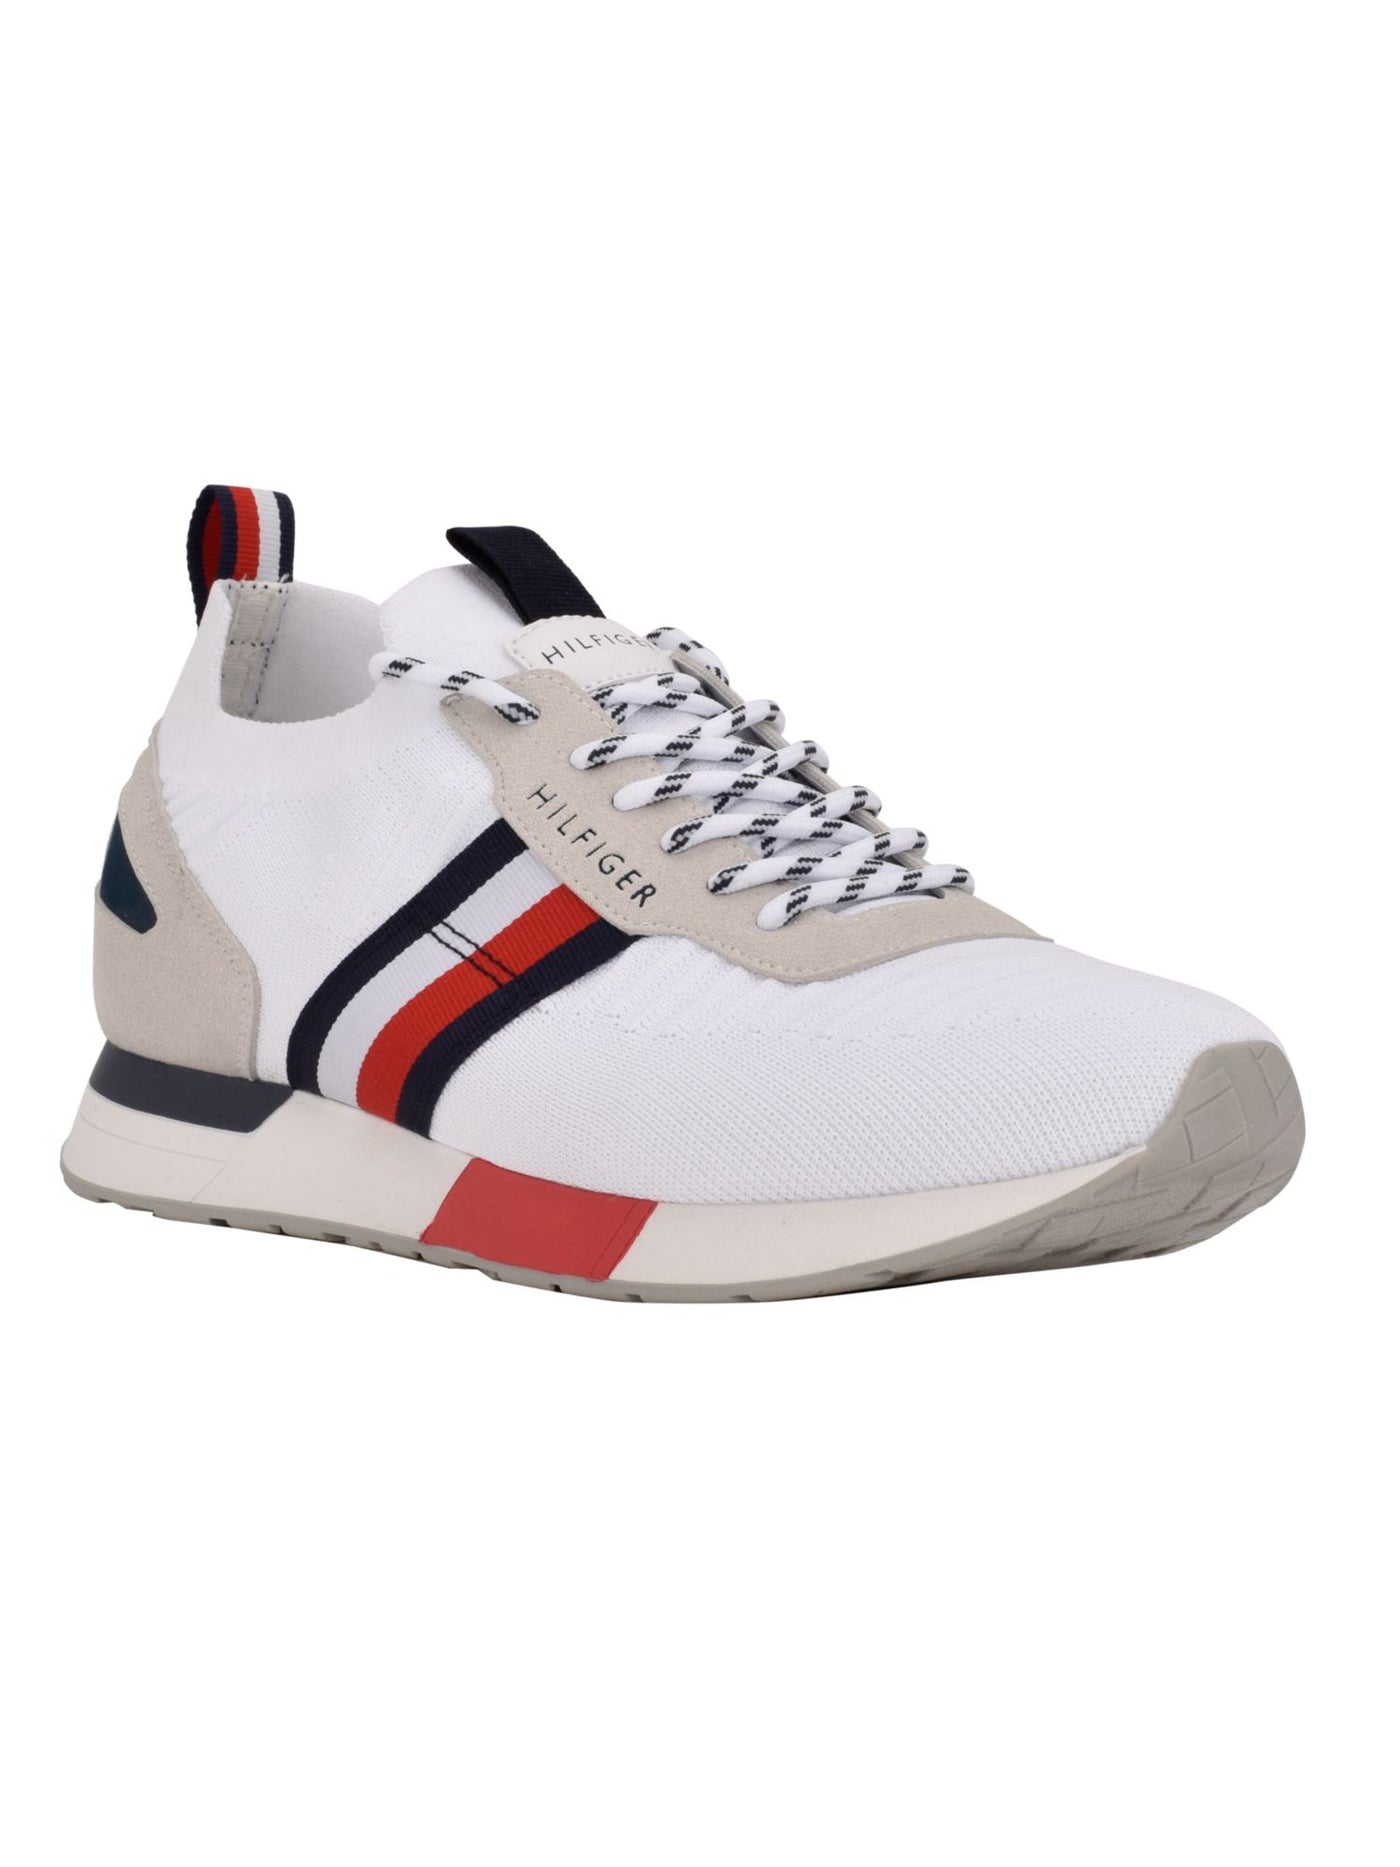 TOMMY HILFIGER Mens White Colorblocked Stripe Dual Pull-Tab Cushioned Stretch Alexie Round Toe Wedge Lace-Up Athletic Running Shoes 13